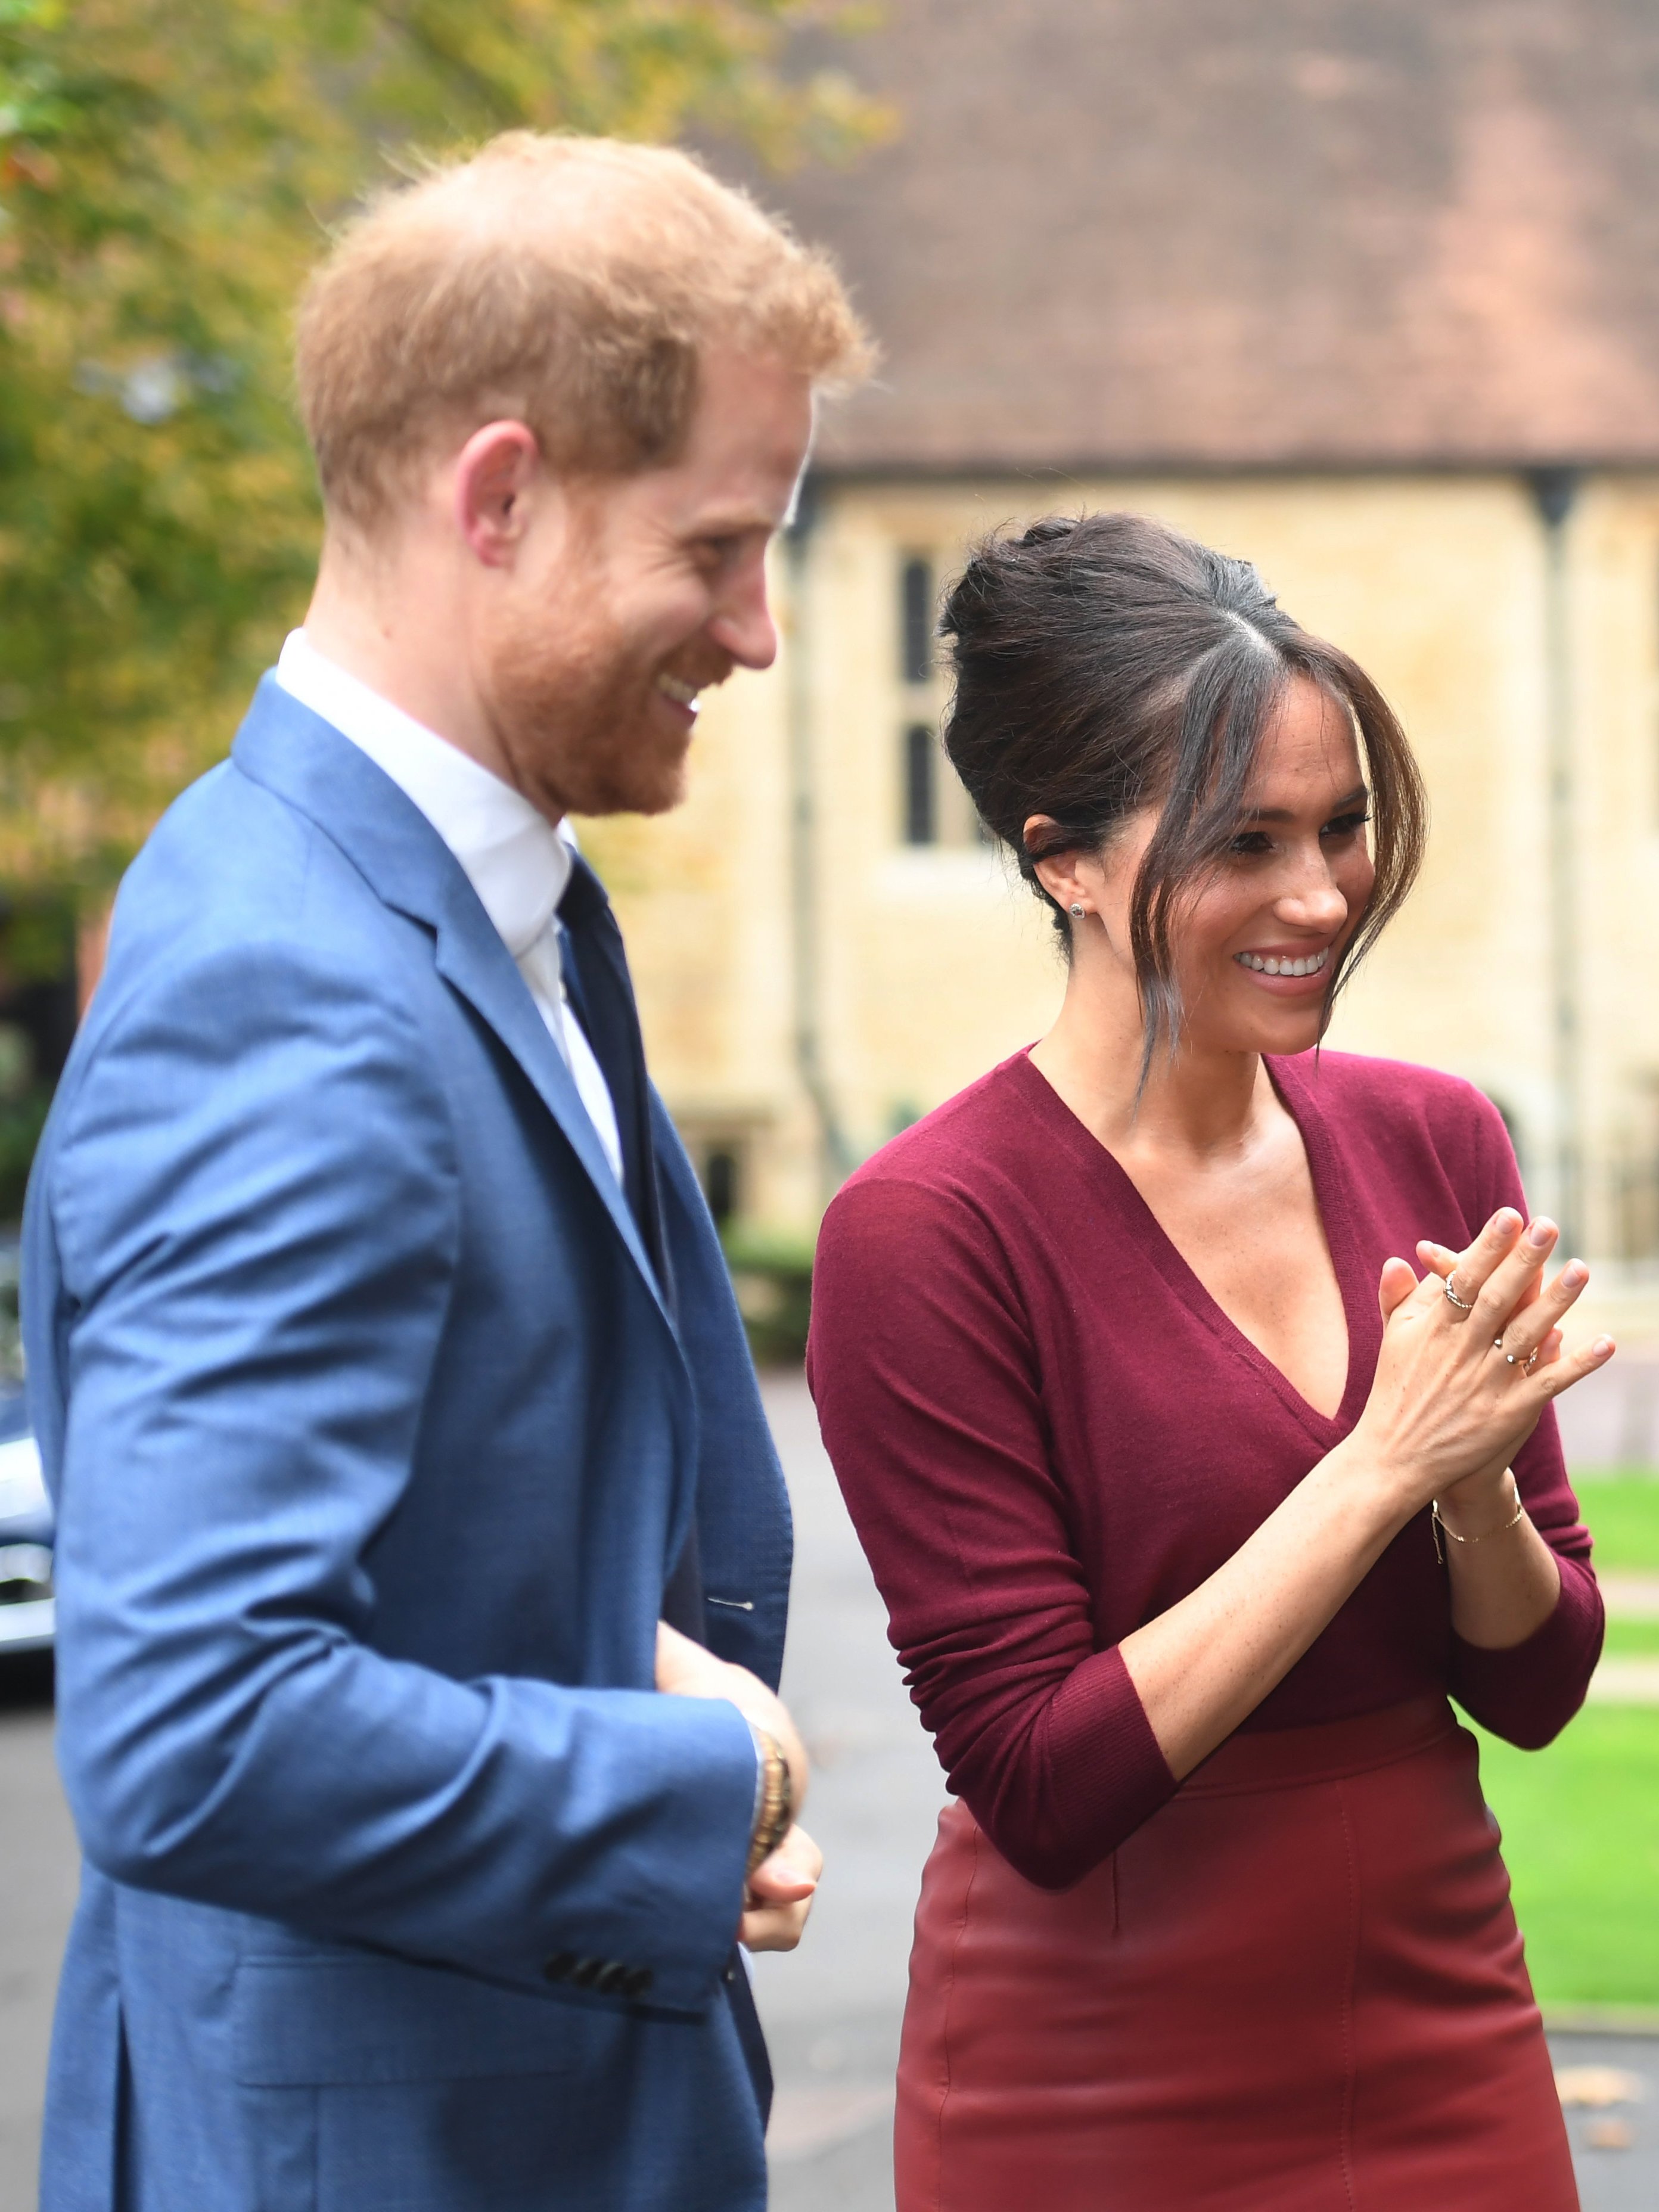 Meghan Markle and Prince Harry attend a roundtable discussion at Windsor Castle on October 25, 2019, in Windsor, England | Source: Getty Images